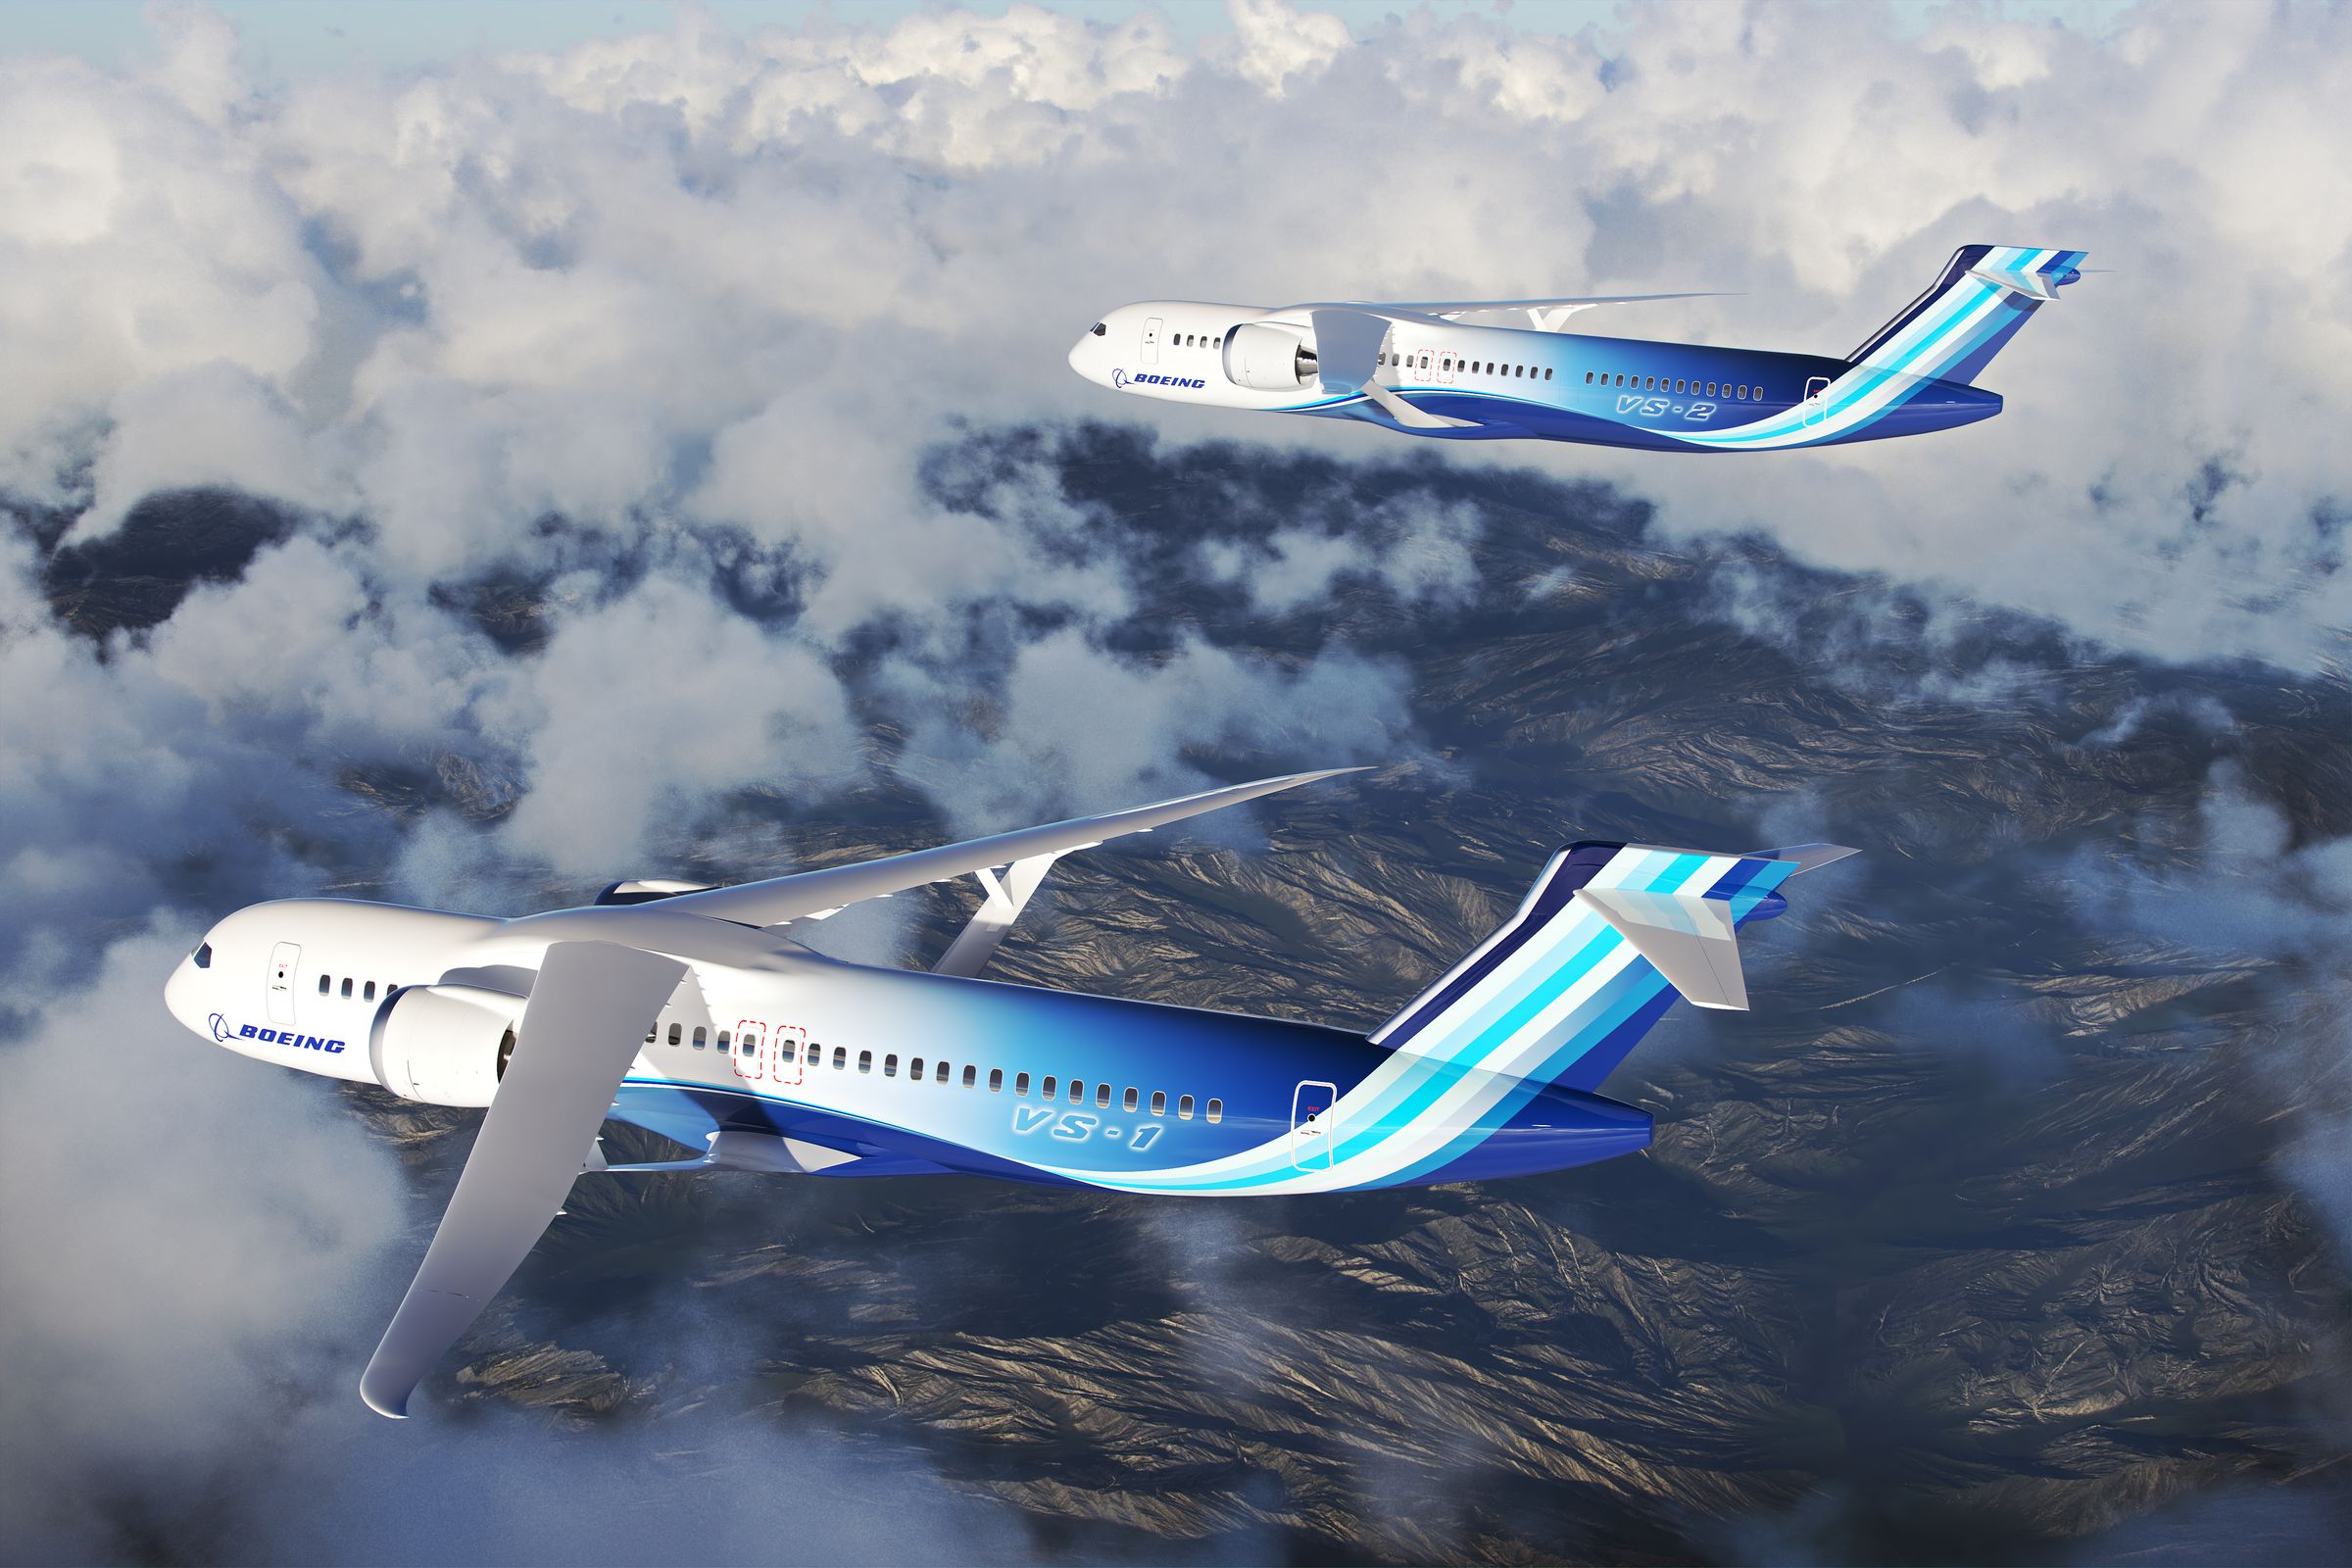 NASA is working on a new, more fuel-efficient aircraft design with Boeing